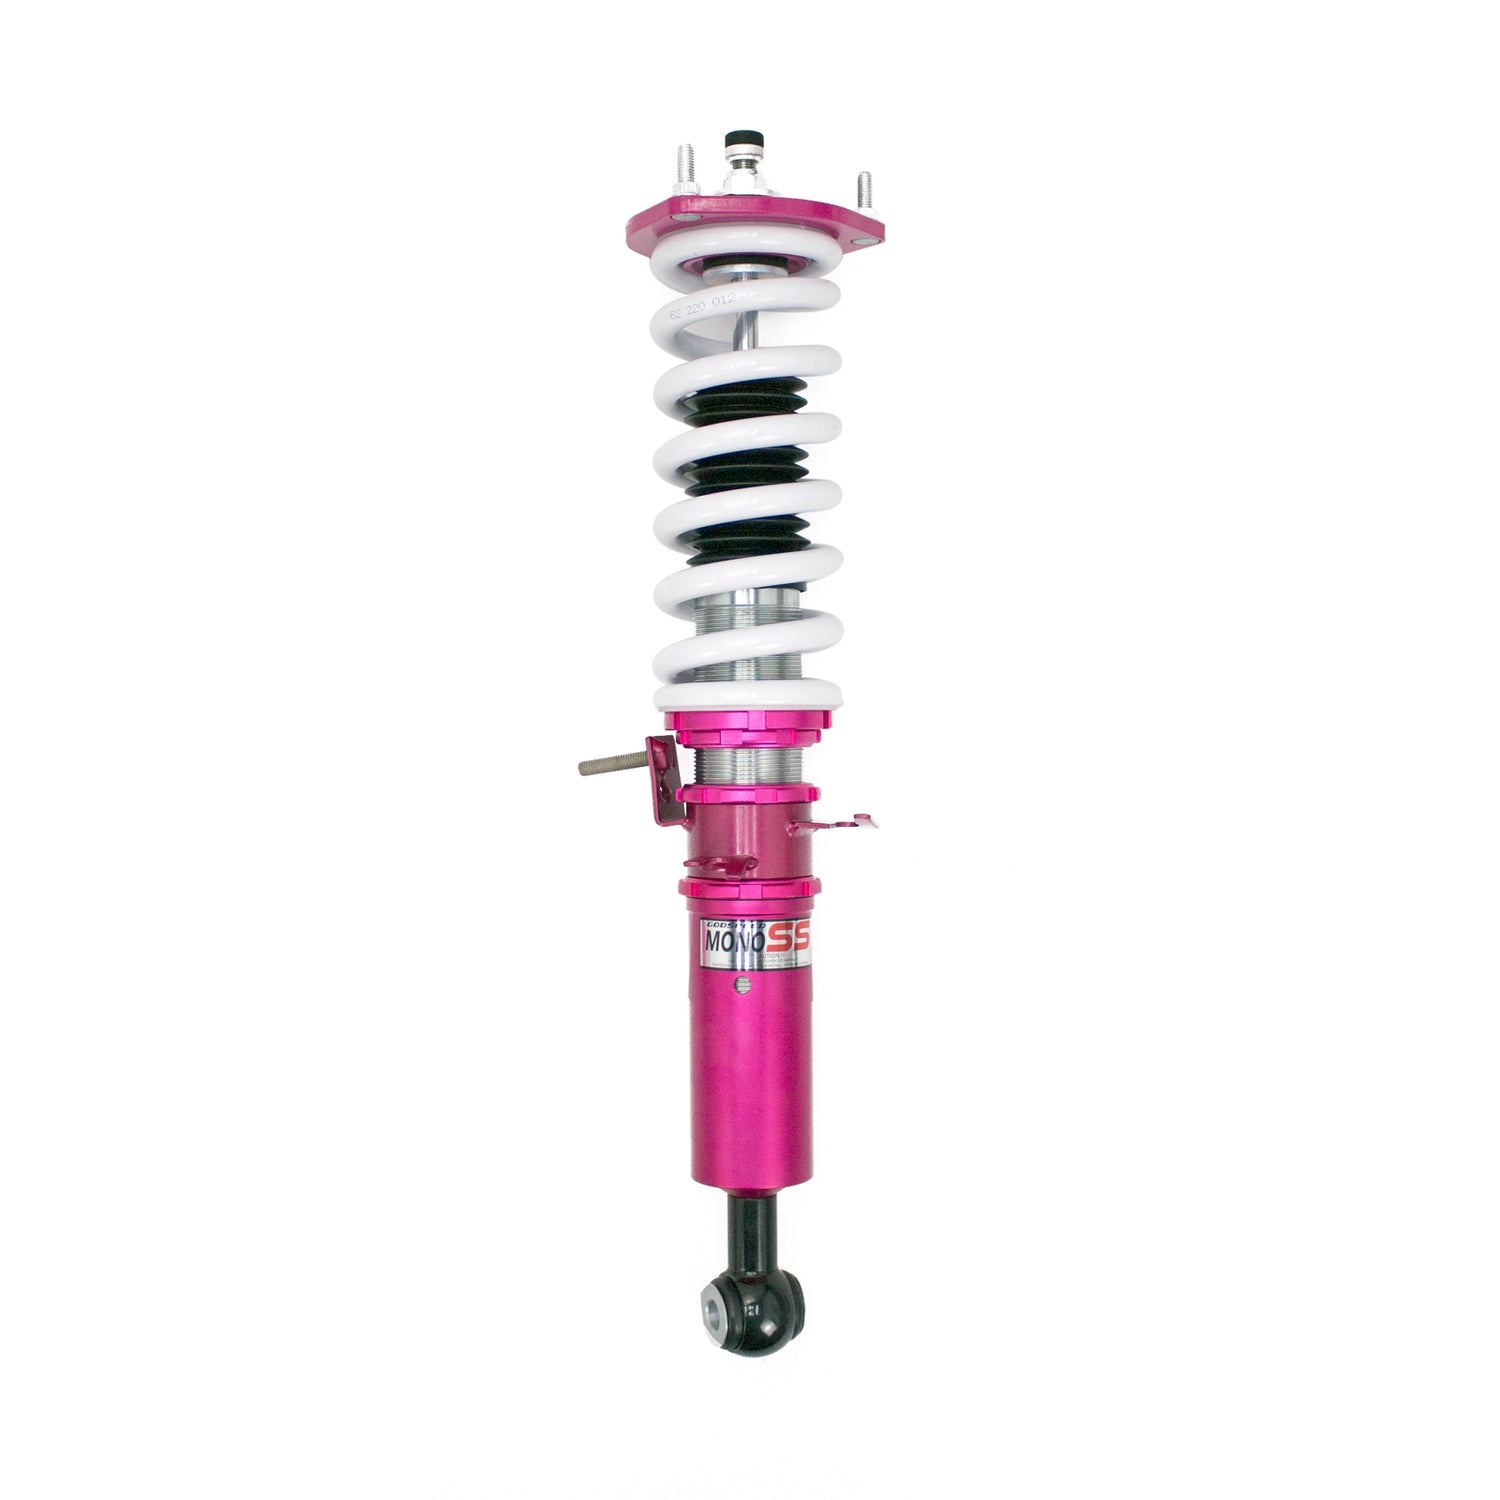 Godspeed MSS0184-B MonoSS Coilover Lowering Kit, Fully Adjustable, Ride Height, Spring Tension And 16 Click Damping, Infiniti G37 Coupe/Sedan 2008-13 RWD